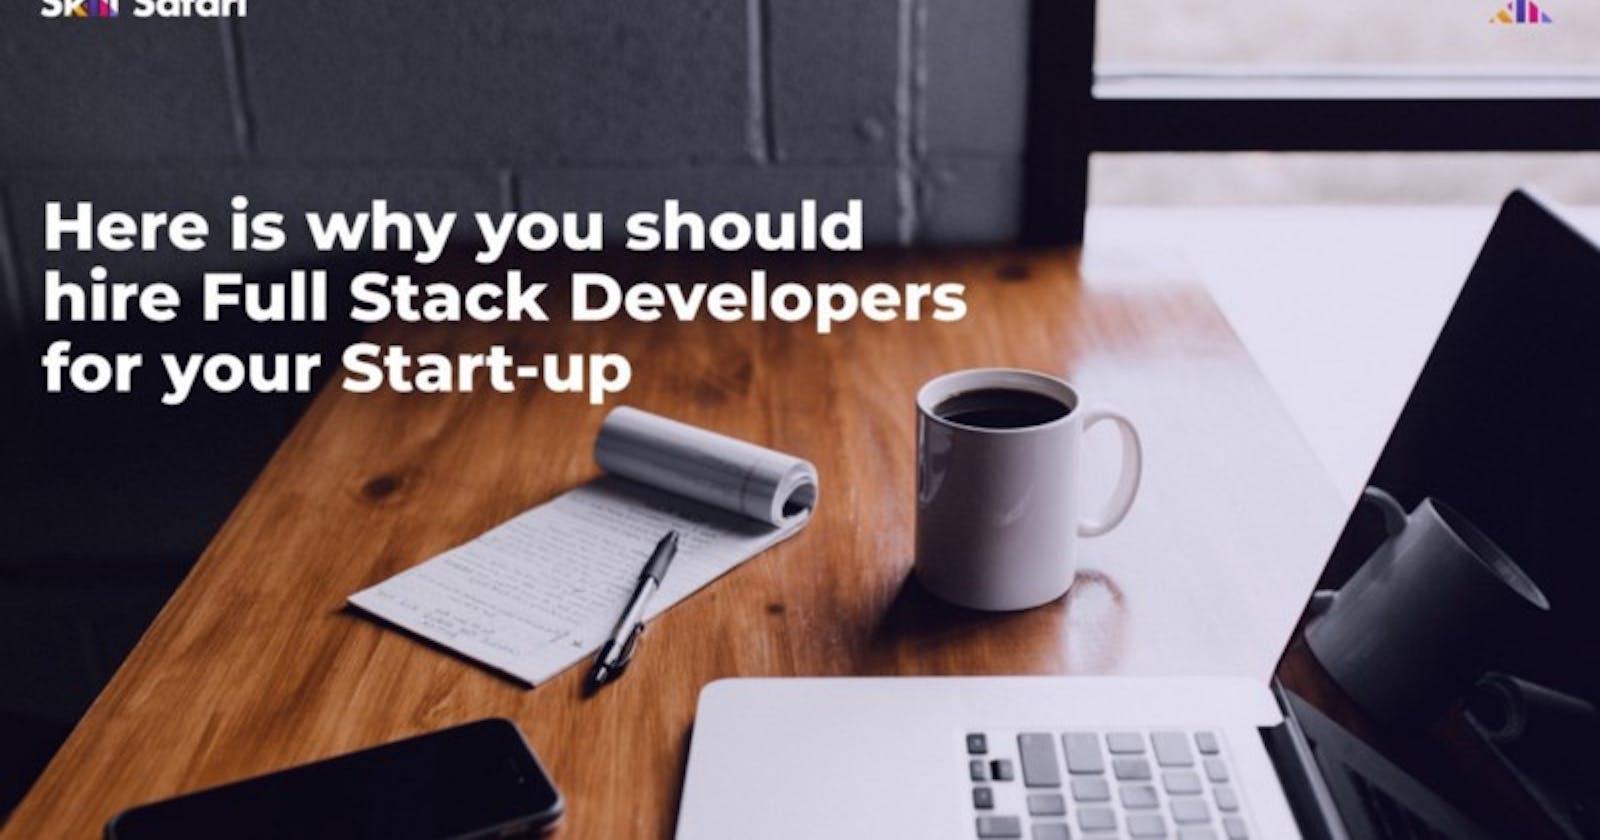 Here is why you should hire Full Stack Developers for your Start-up